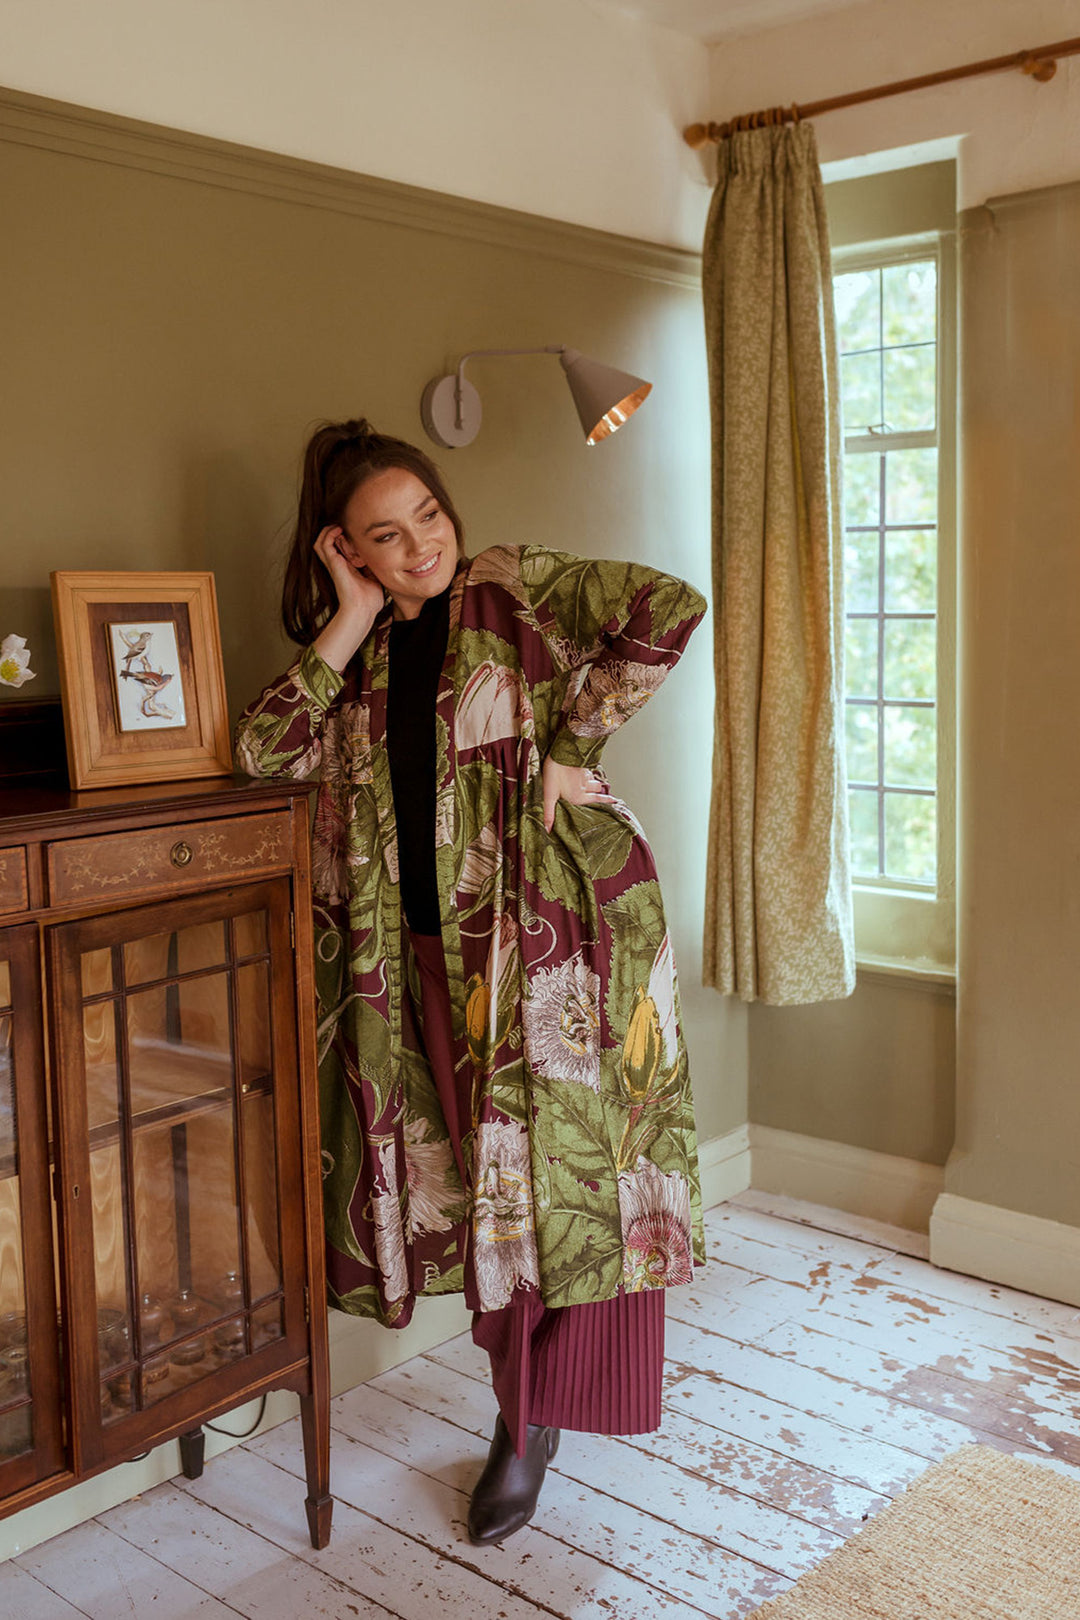 KEW Passion Flower Burgundy Duster Coat- This stunning shape is both stylish and versatile, whether you choose to wear our duster coat as a luxurious house coat, as part of a chic ensemble during the day or over a little black dress during the evening.